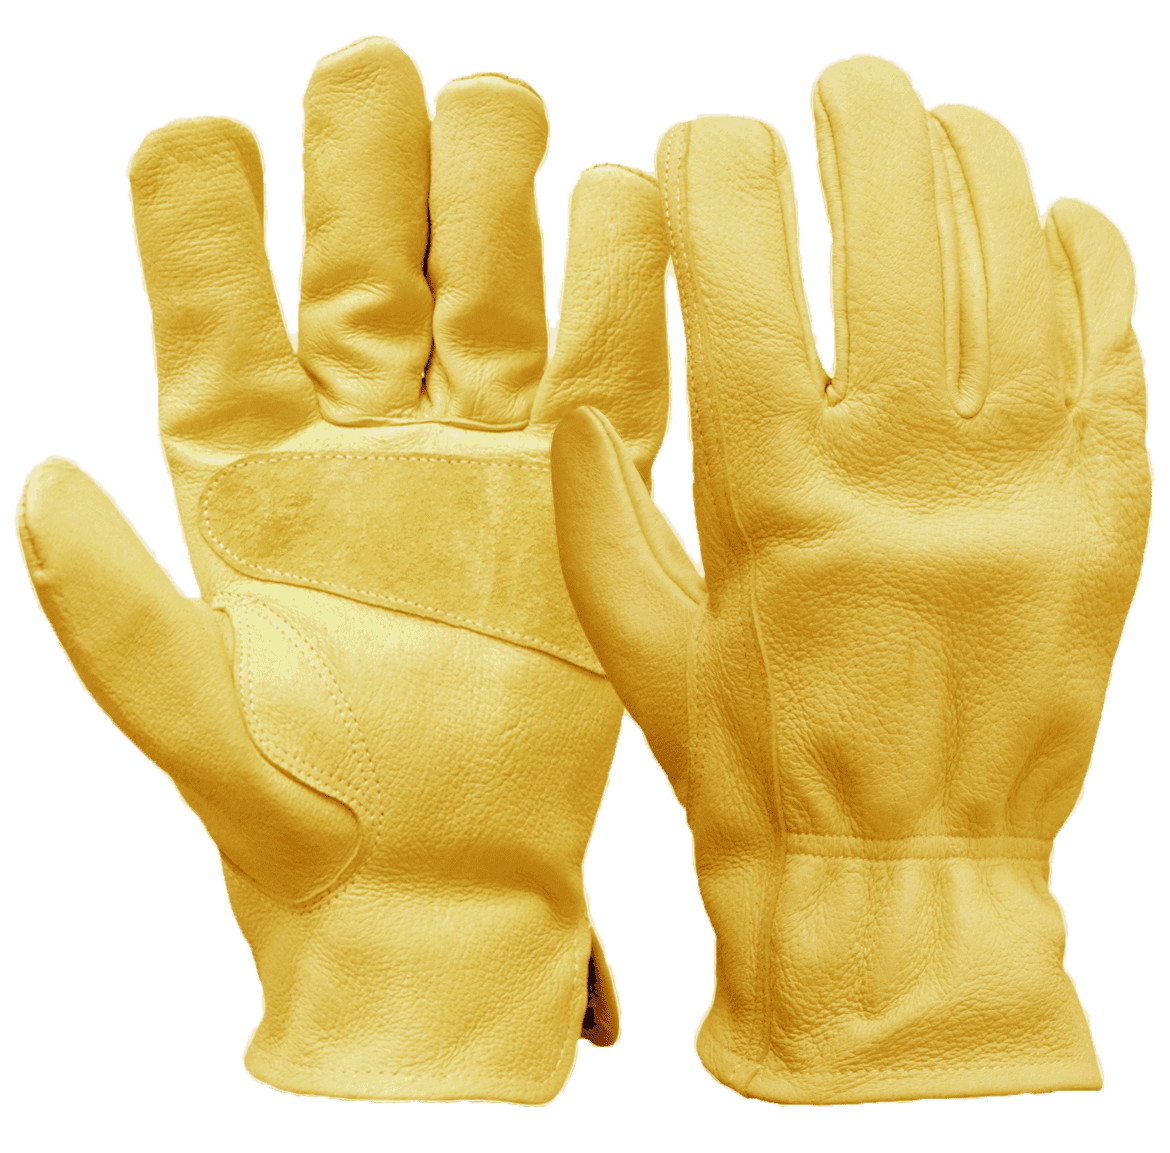 Cutter Ultimate Utility Gloves Cow Grain Leather Safety Work Wear XLarge 